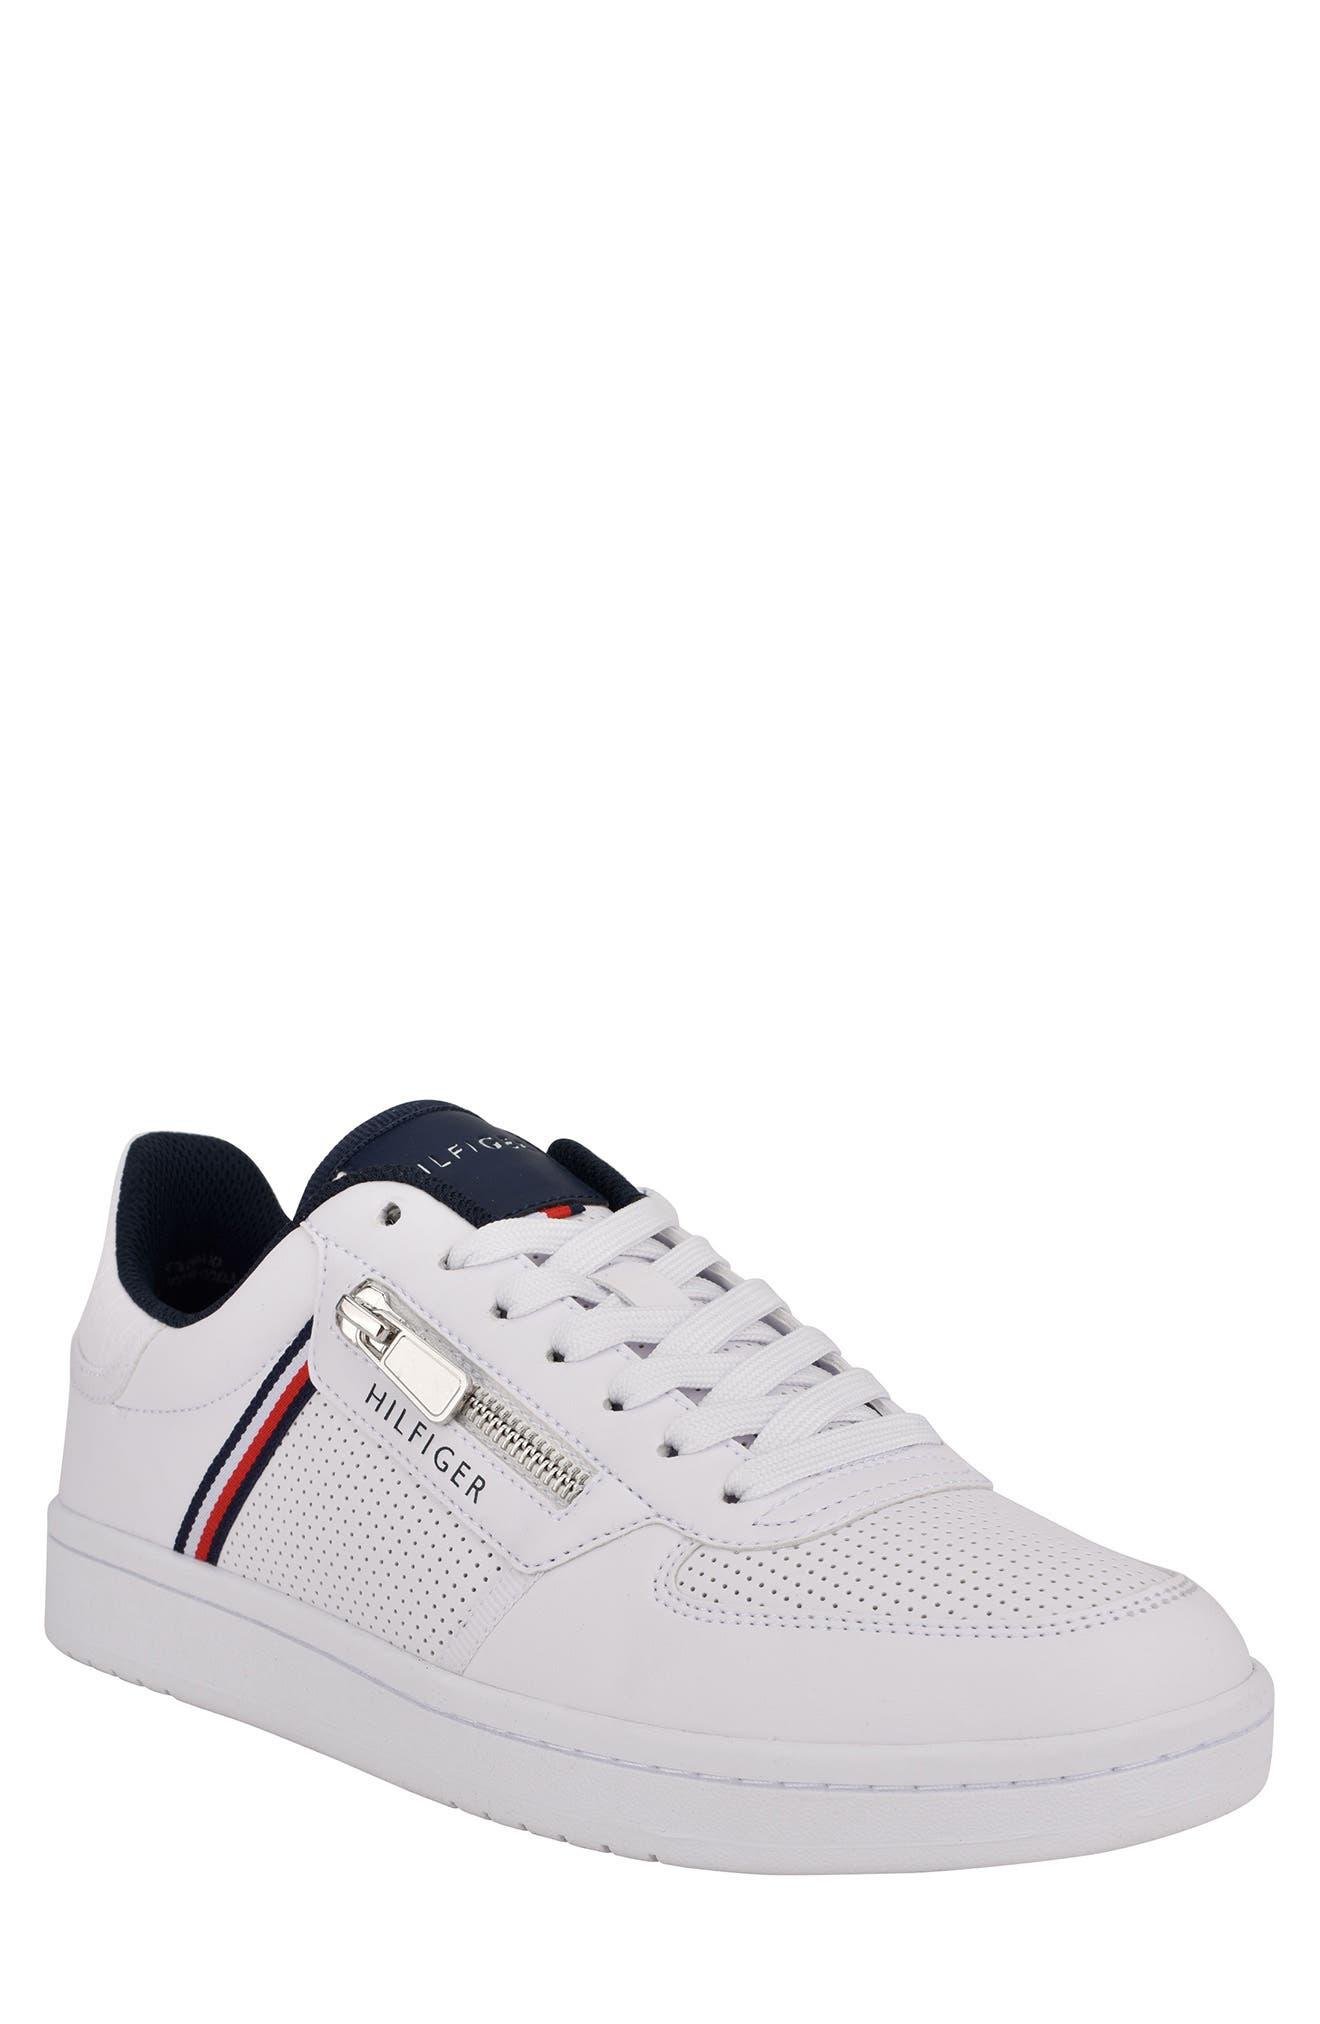 Tommy Hilfiger Lestyn Faux Leather Zip Sneaker In White Ll At Nordstrom Rack for Men Lyst